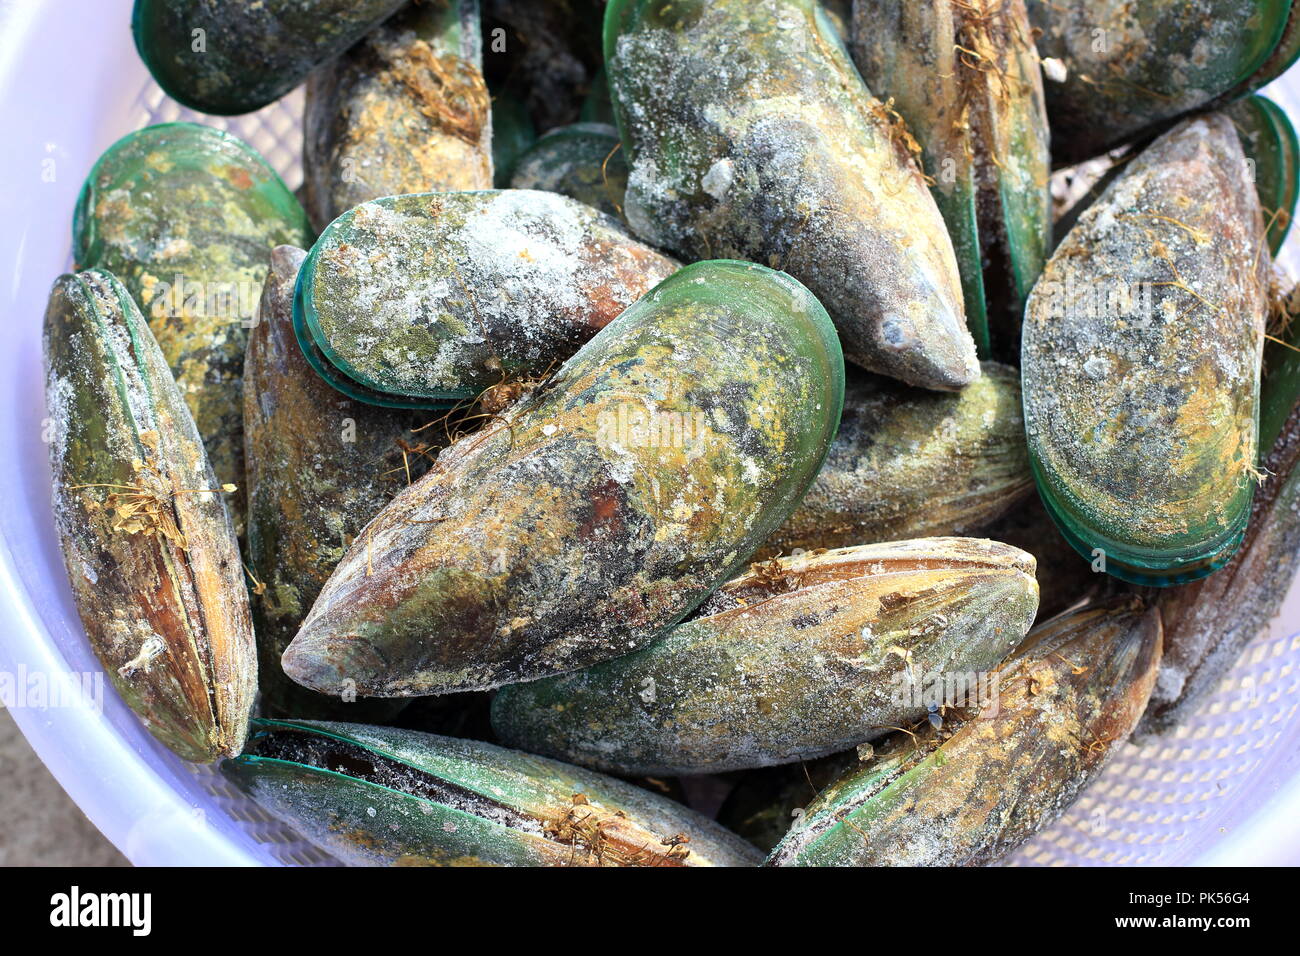 Perna canaliculus or known as New Zealand green-lipped mussel Stock Photo